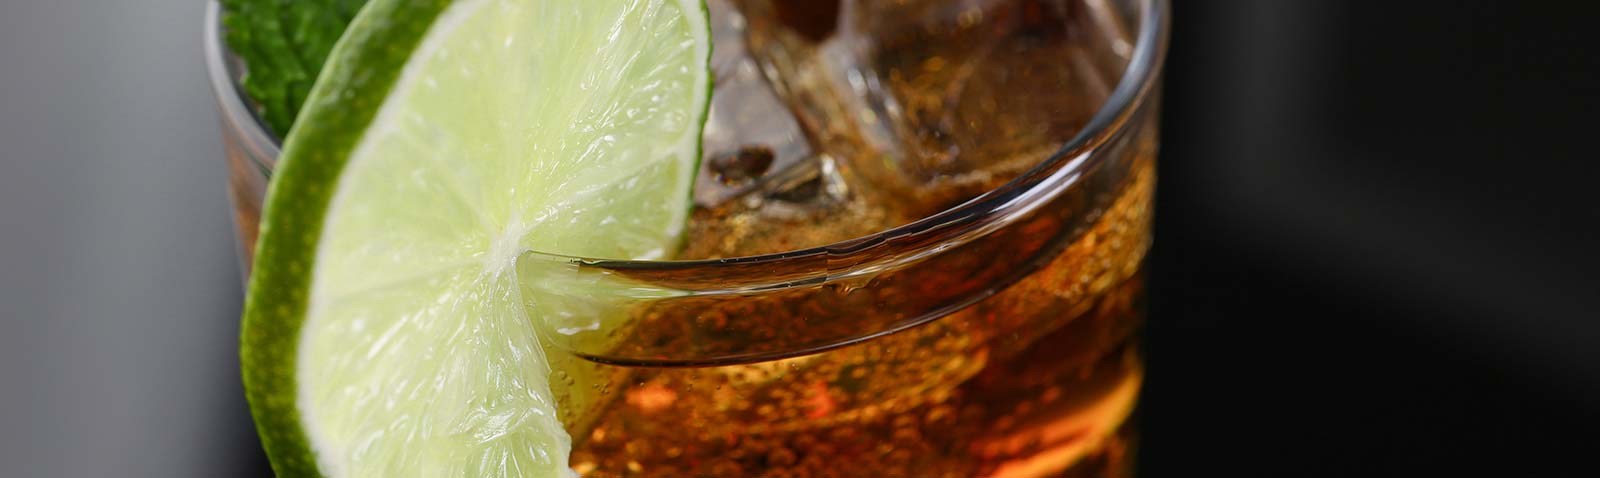 Closeup of rum with a lime wedge on the glass